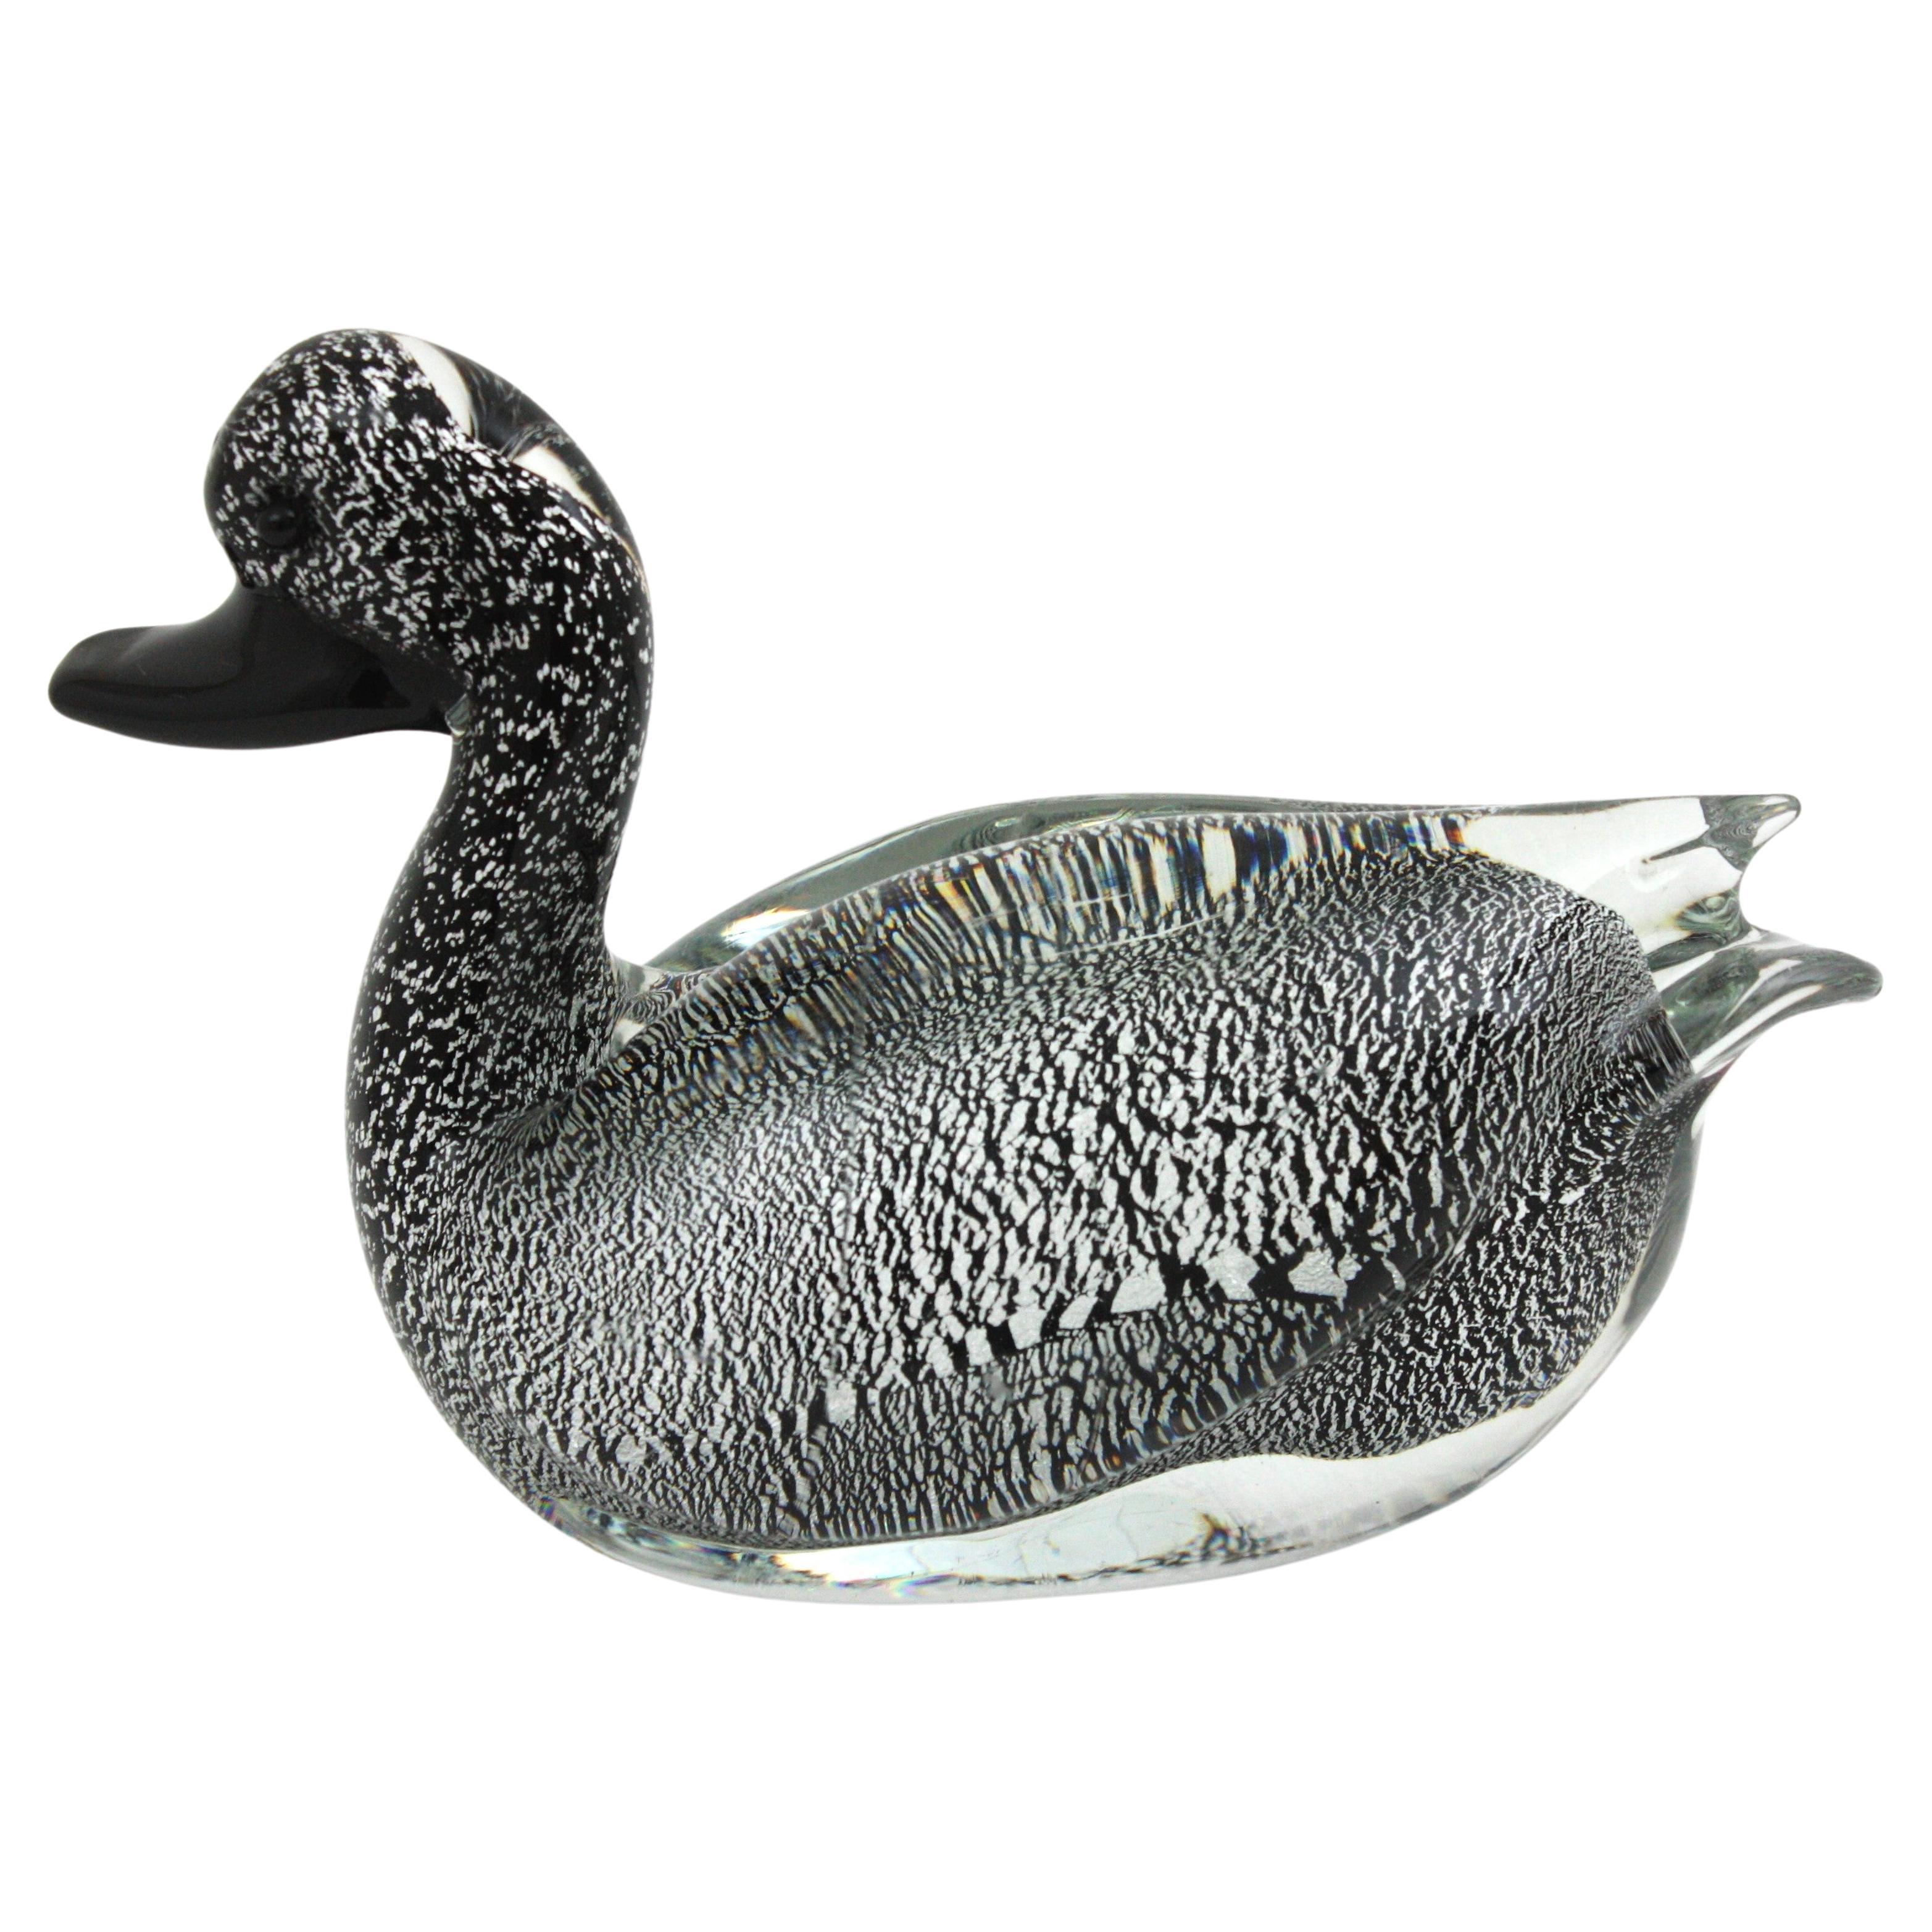  Murano Black Clear Duck Sculpture Art Glass Paperweight with Silver Flecks For Sale 3